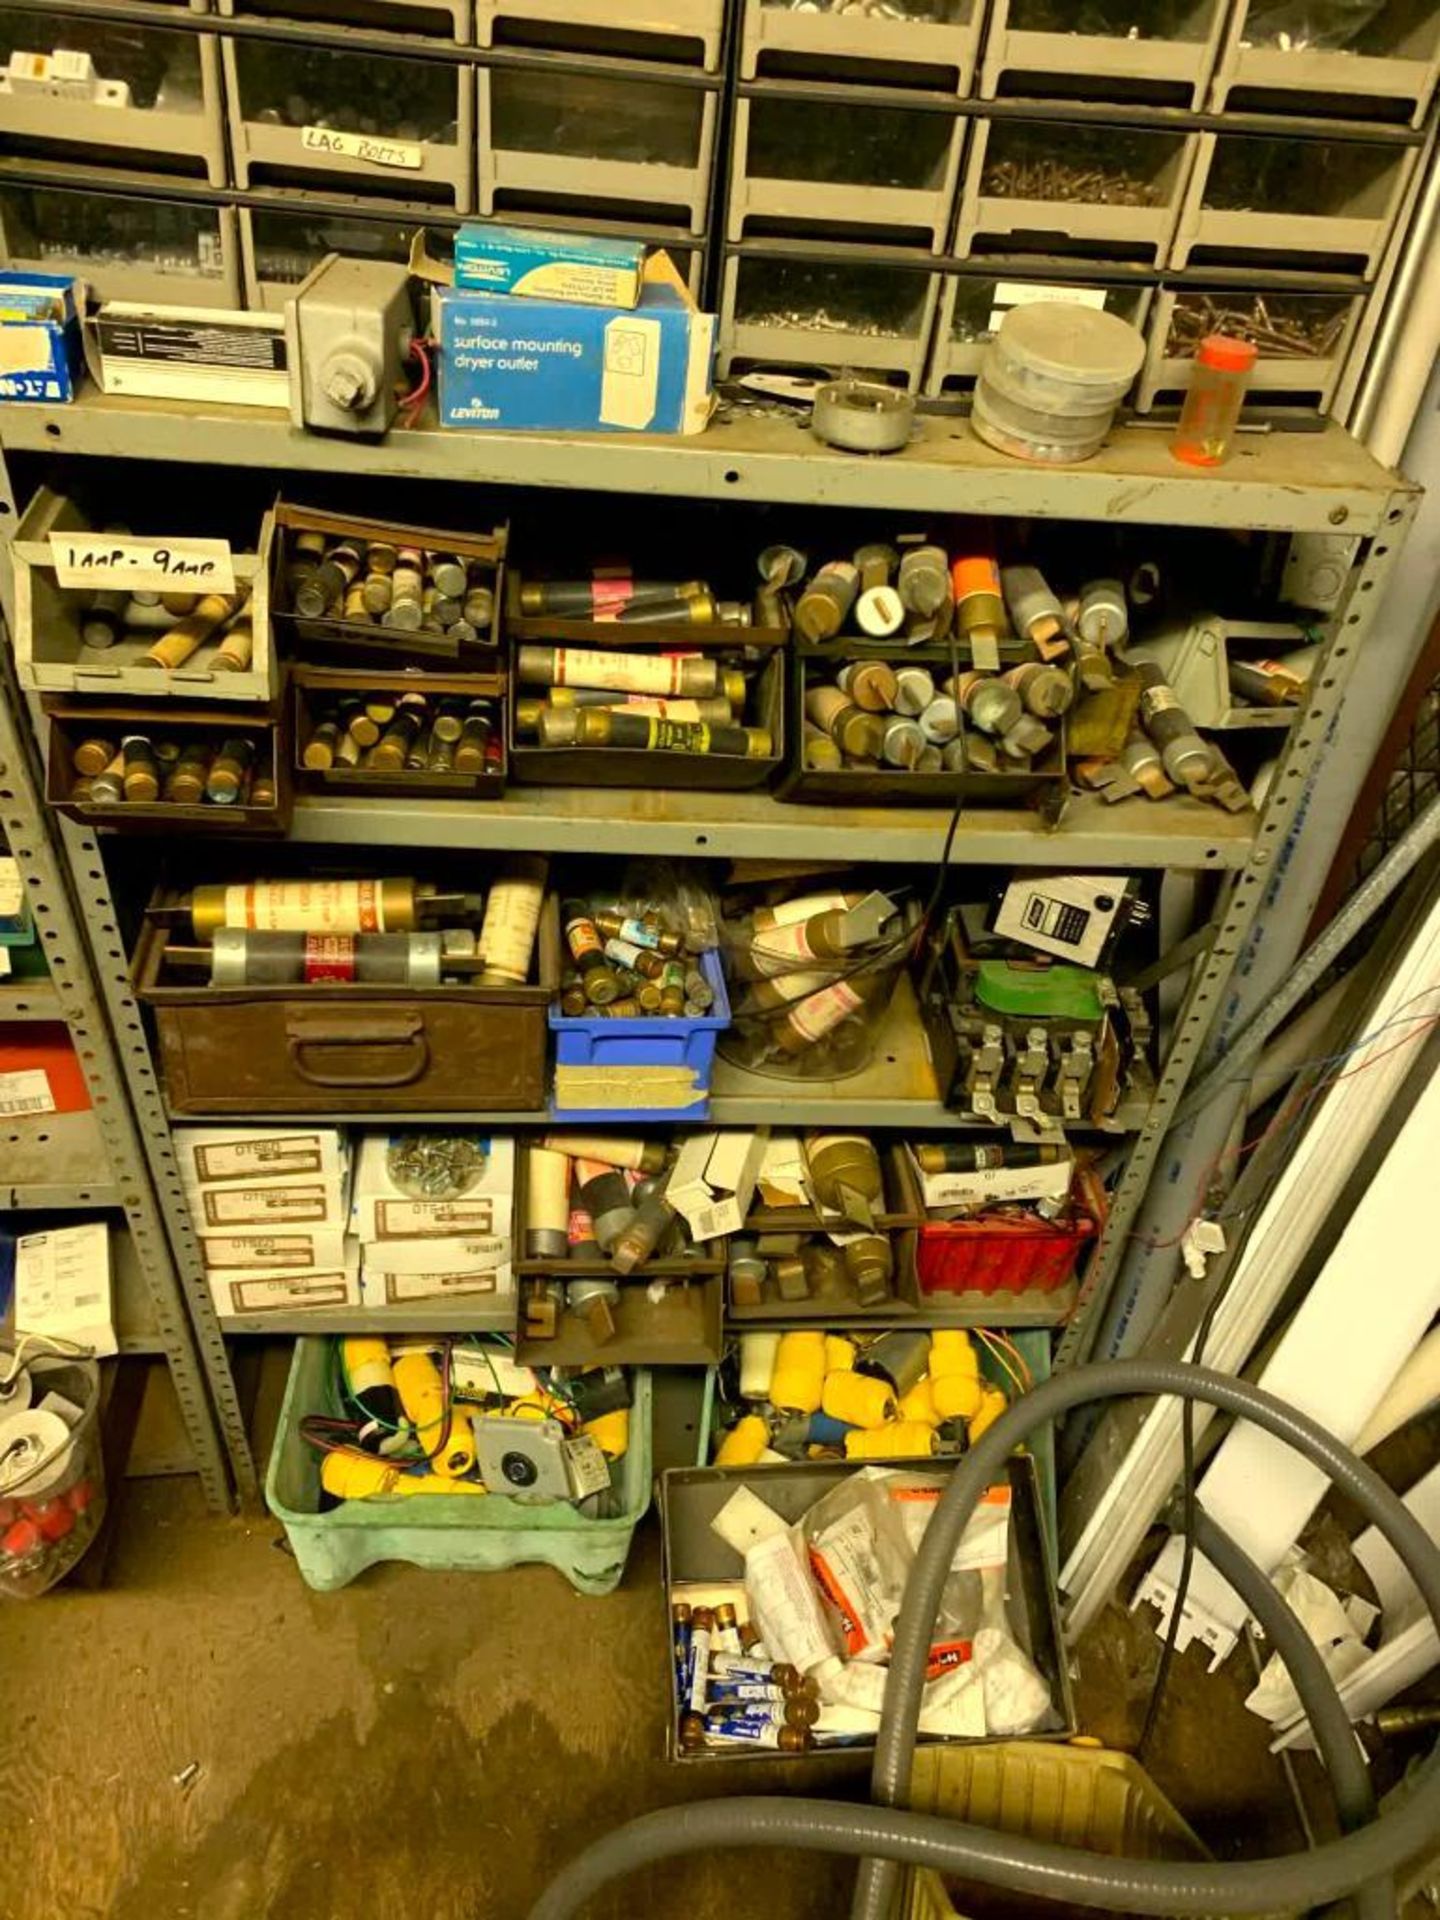 Content of Electrical Supply Room; Spools of Wire, Couplings, Breakers, Fuses, & Much More - Image 17 of 18